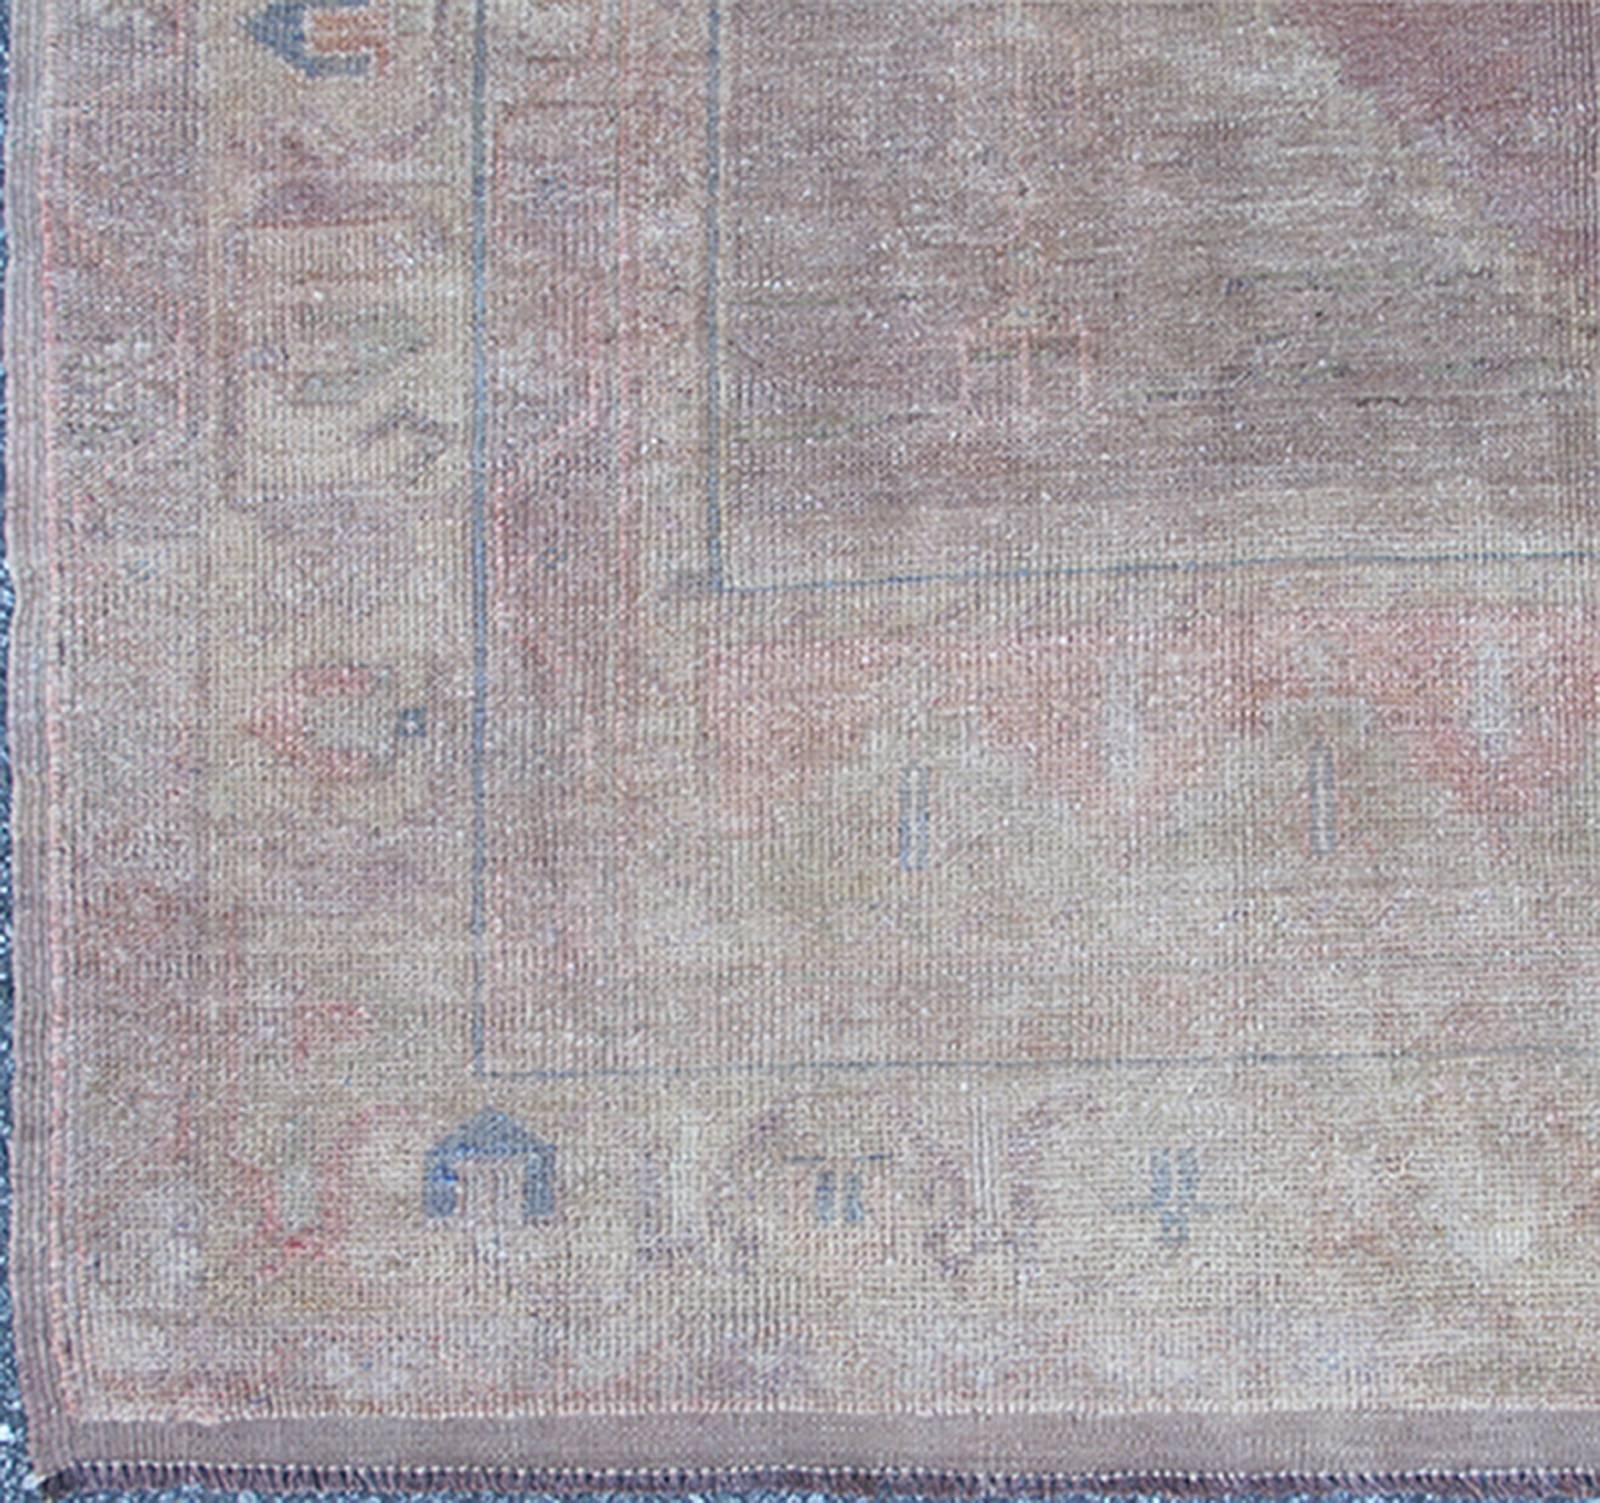 Vintage Muted Oushak rug from Turkey with medallion in lavender and light pink, rug ayd-95078, country of origin / type: Turkey / Oushak, circa mid-20th century

This muted vintage Turkish Oushak carpet (circa mid-20th century) features a central,